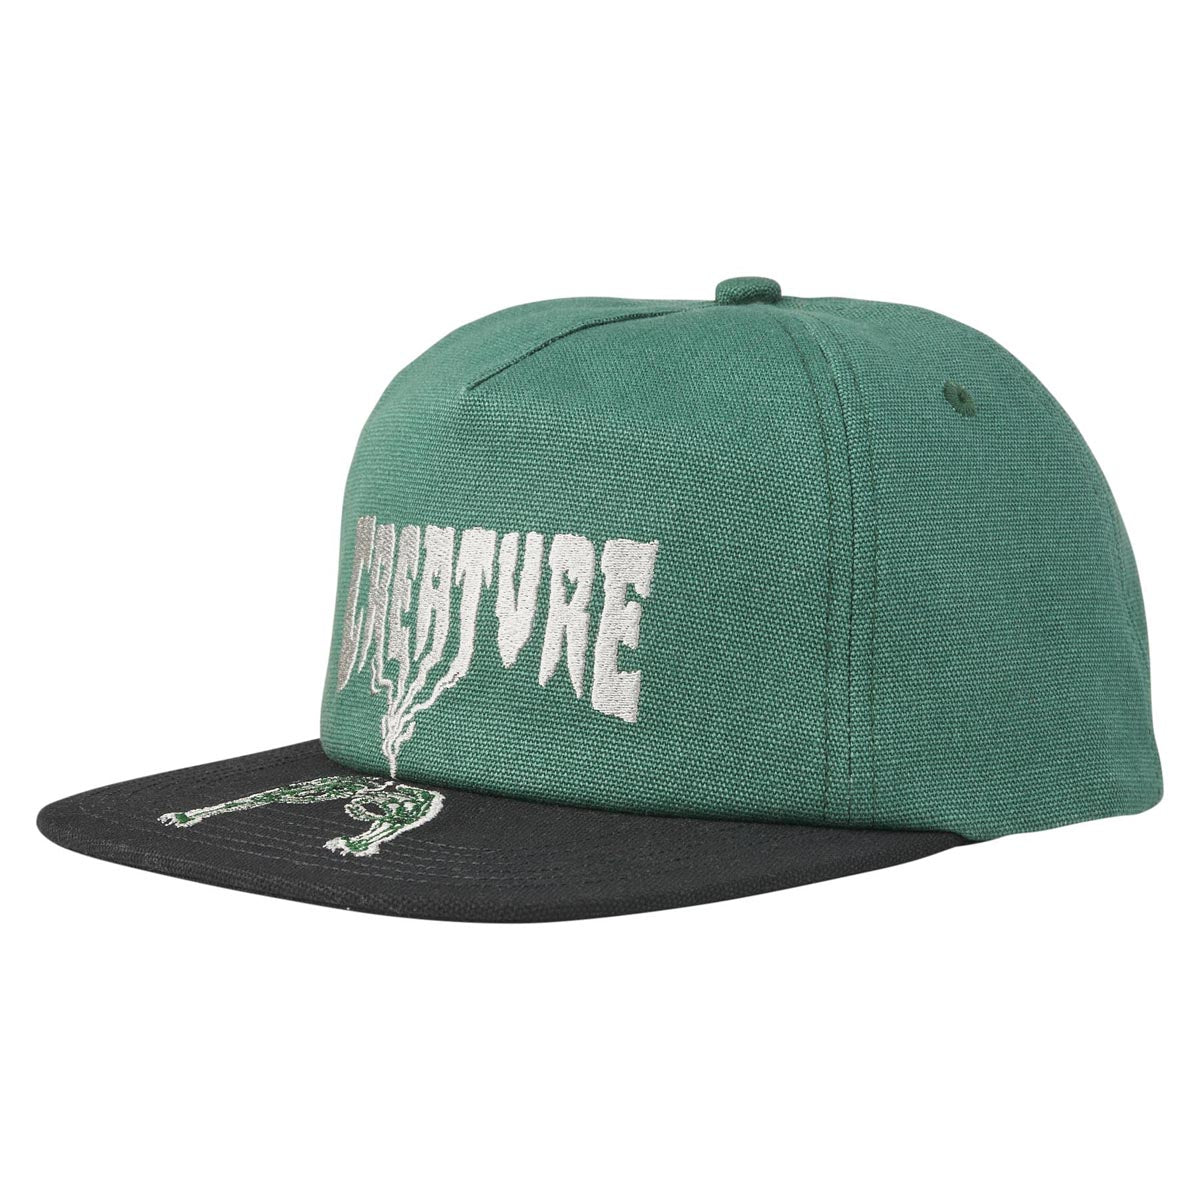 Creature Rolling In The Grave Snapback Hat - Dark Green/Black image 1